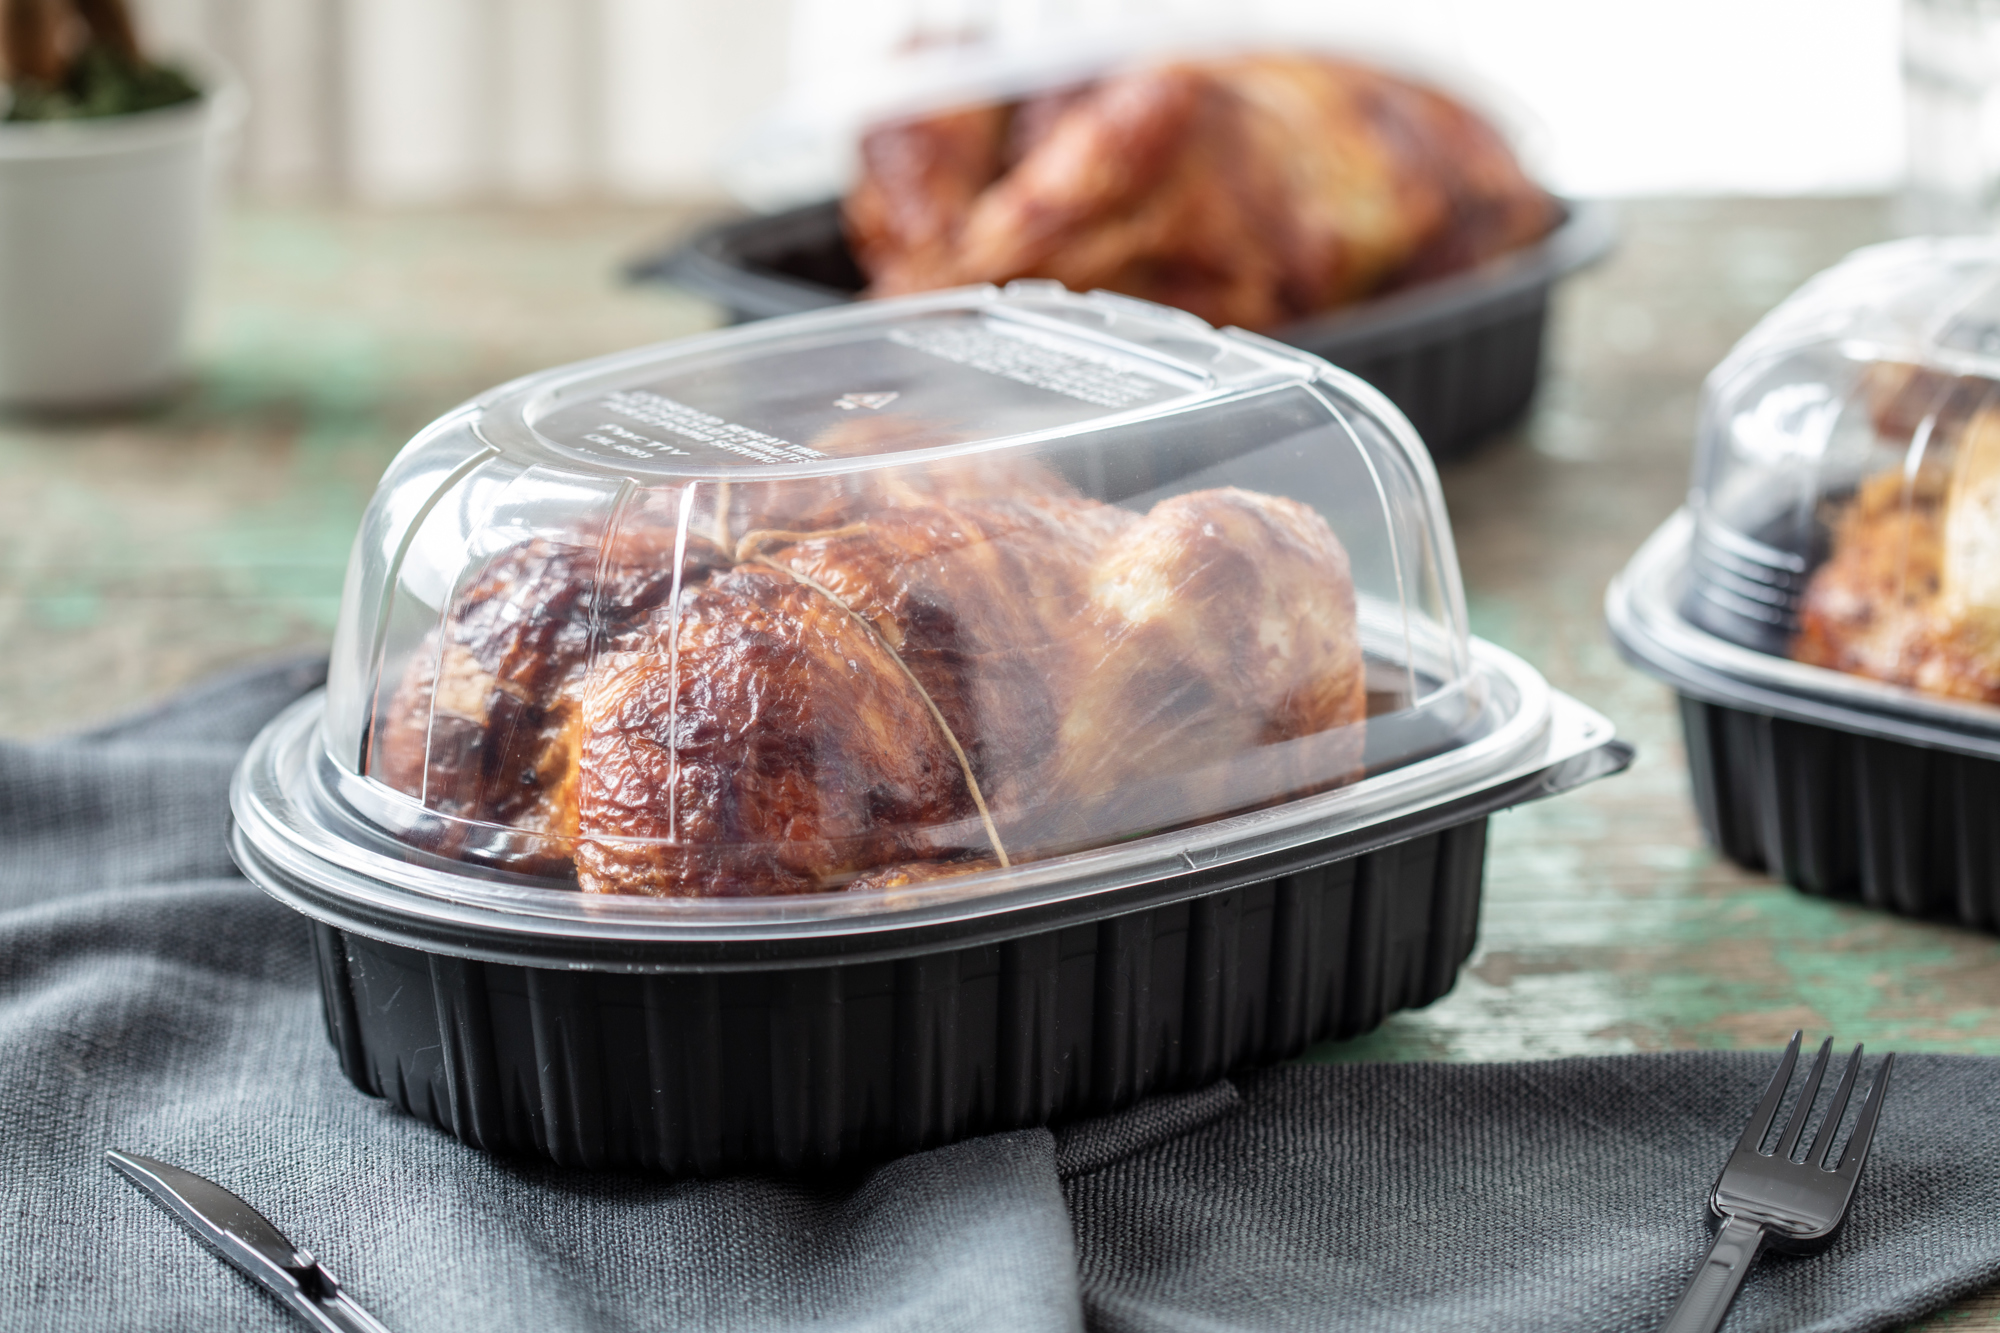 10.75 x 8.5x 4.25” Extra Large Roaster Hot/Cold Display, Takeout  Container with Label Panel, Black Base with Clear Dome, 95 ct.